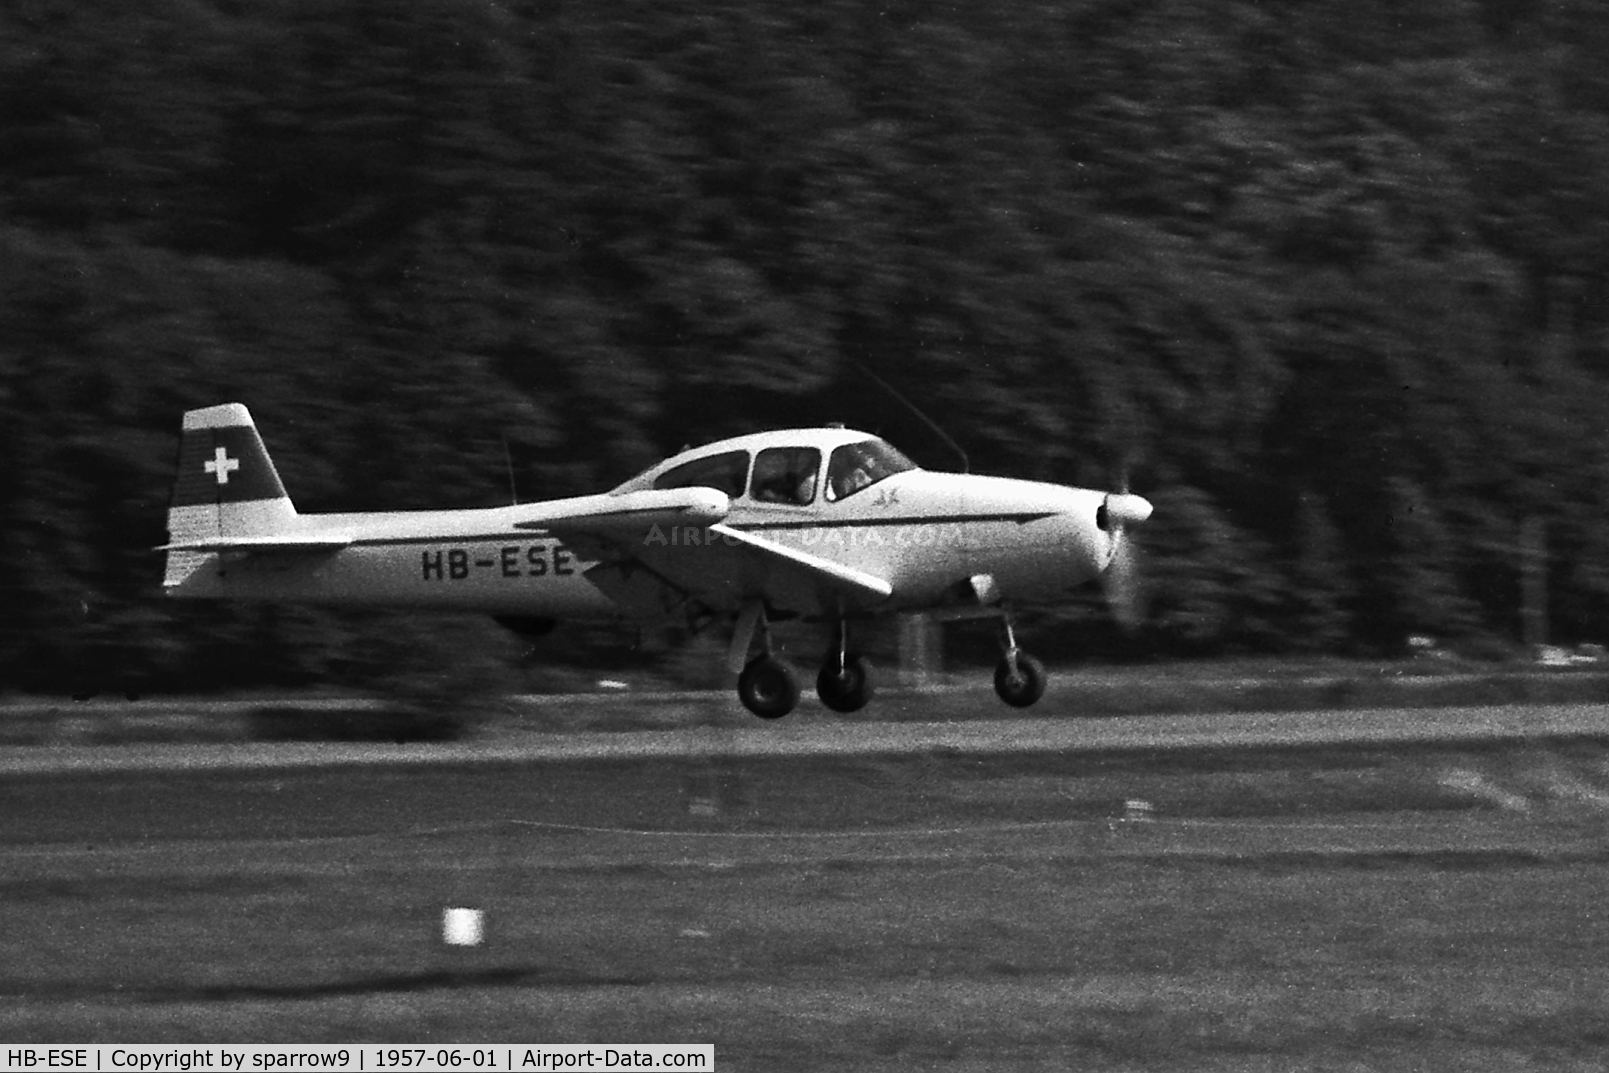 HB-ESE, 1948 Ryan Navion A C/N NAV-4-1259, At Biel-Boezingen airfield, now closed.
Scanned from a 6x9 negative.